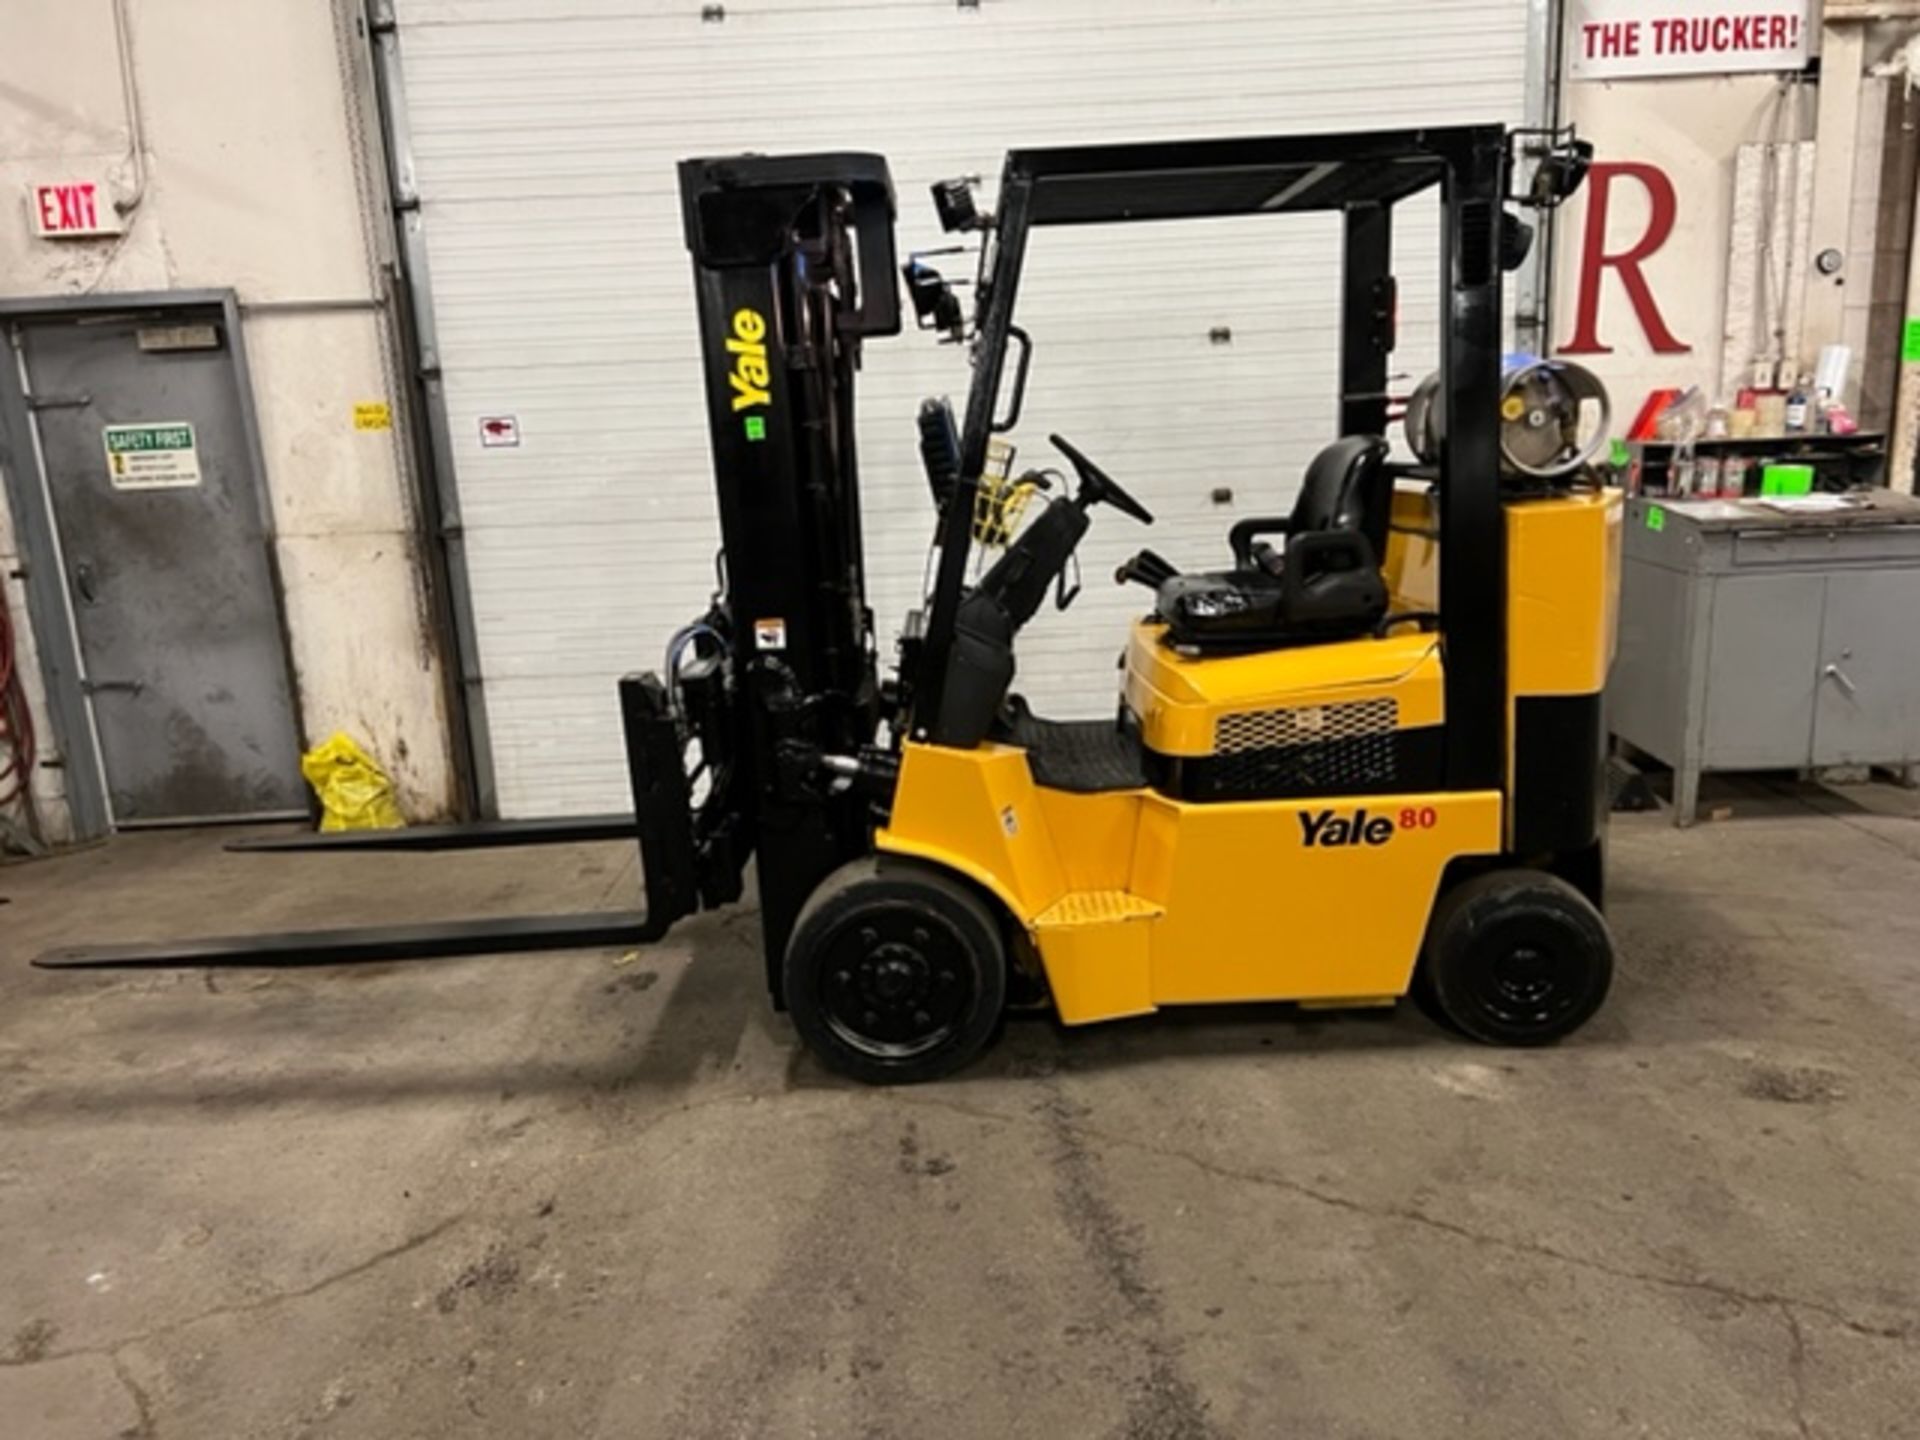 FREE CUSTOMS - NICE Yale model 80 - 8,000lbs Capacity Forklift LPG (propane) with 60" forks with